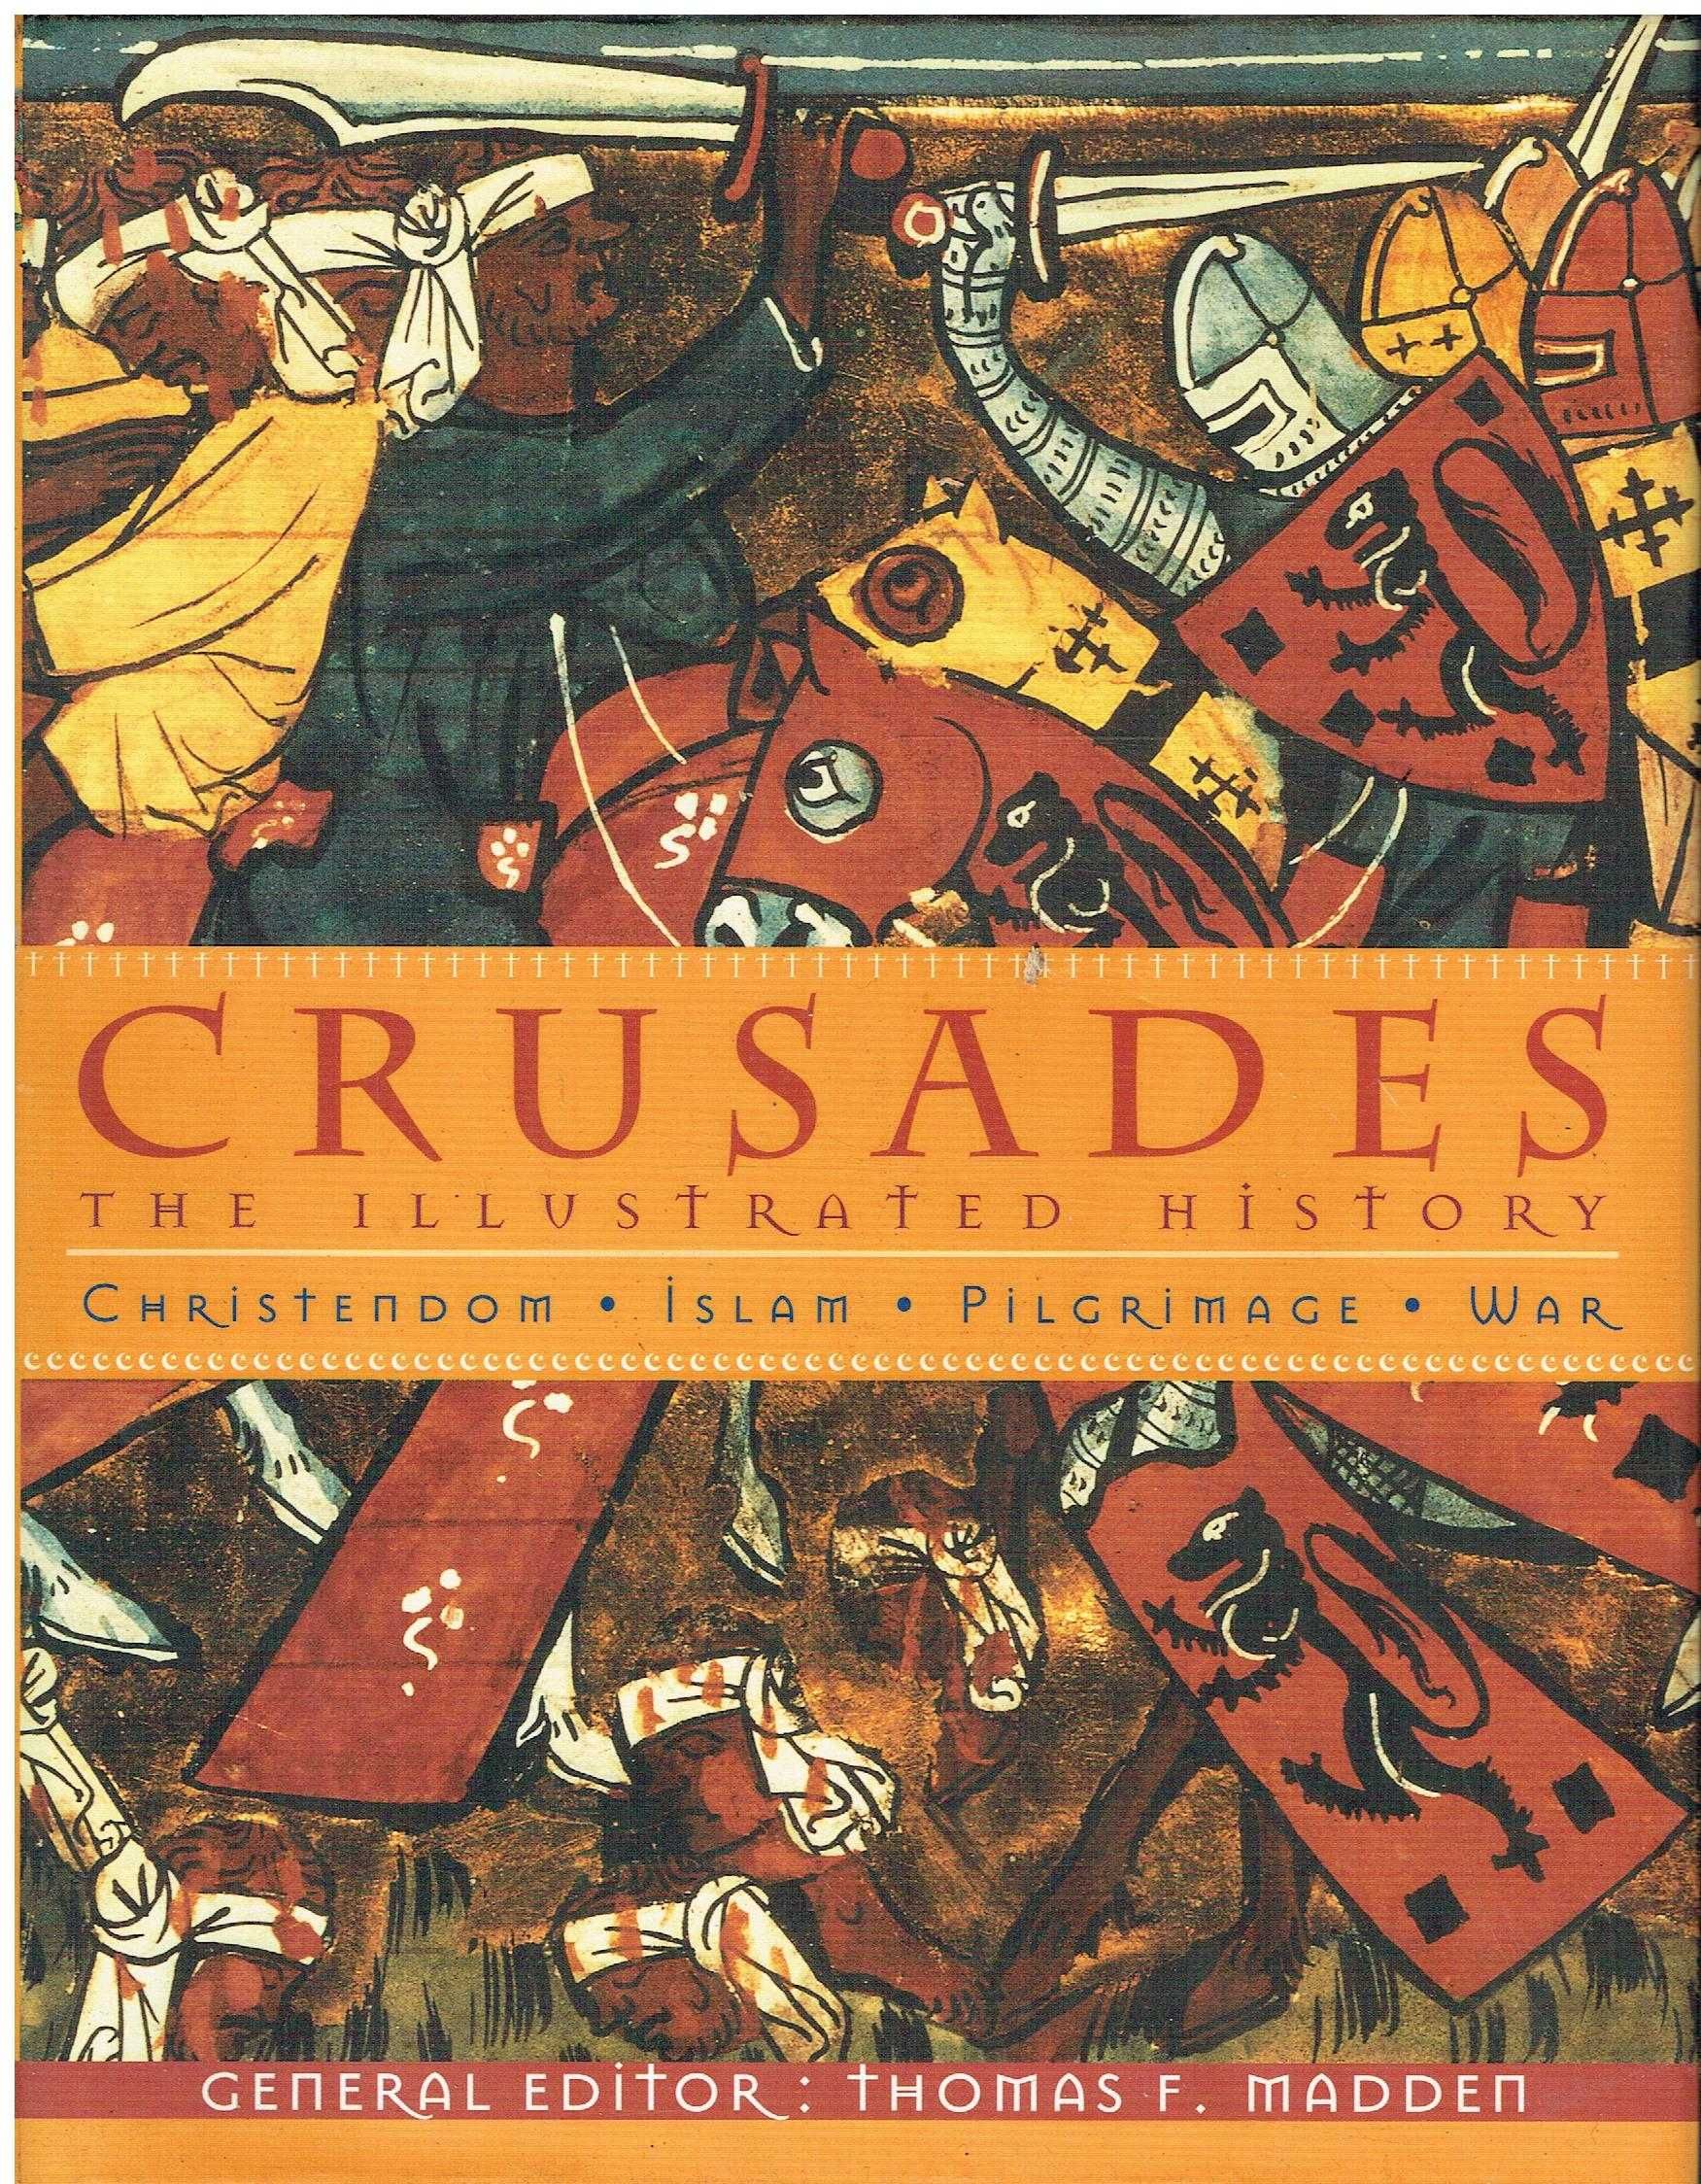 7697

Crusades: The Illustrated History